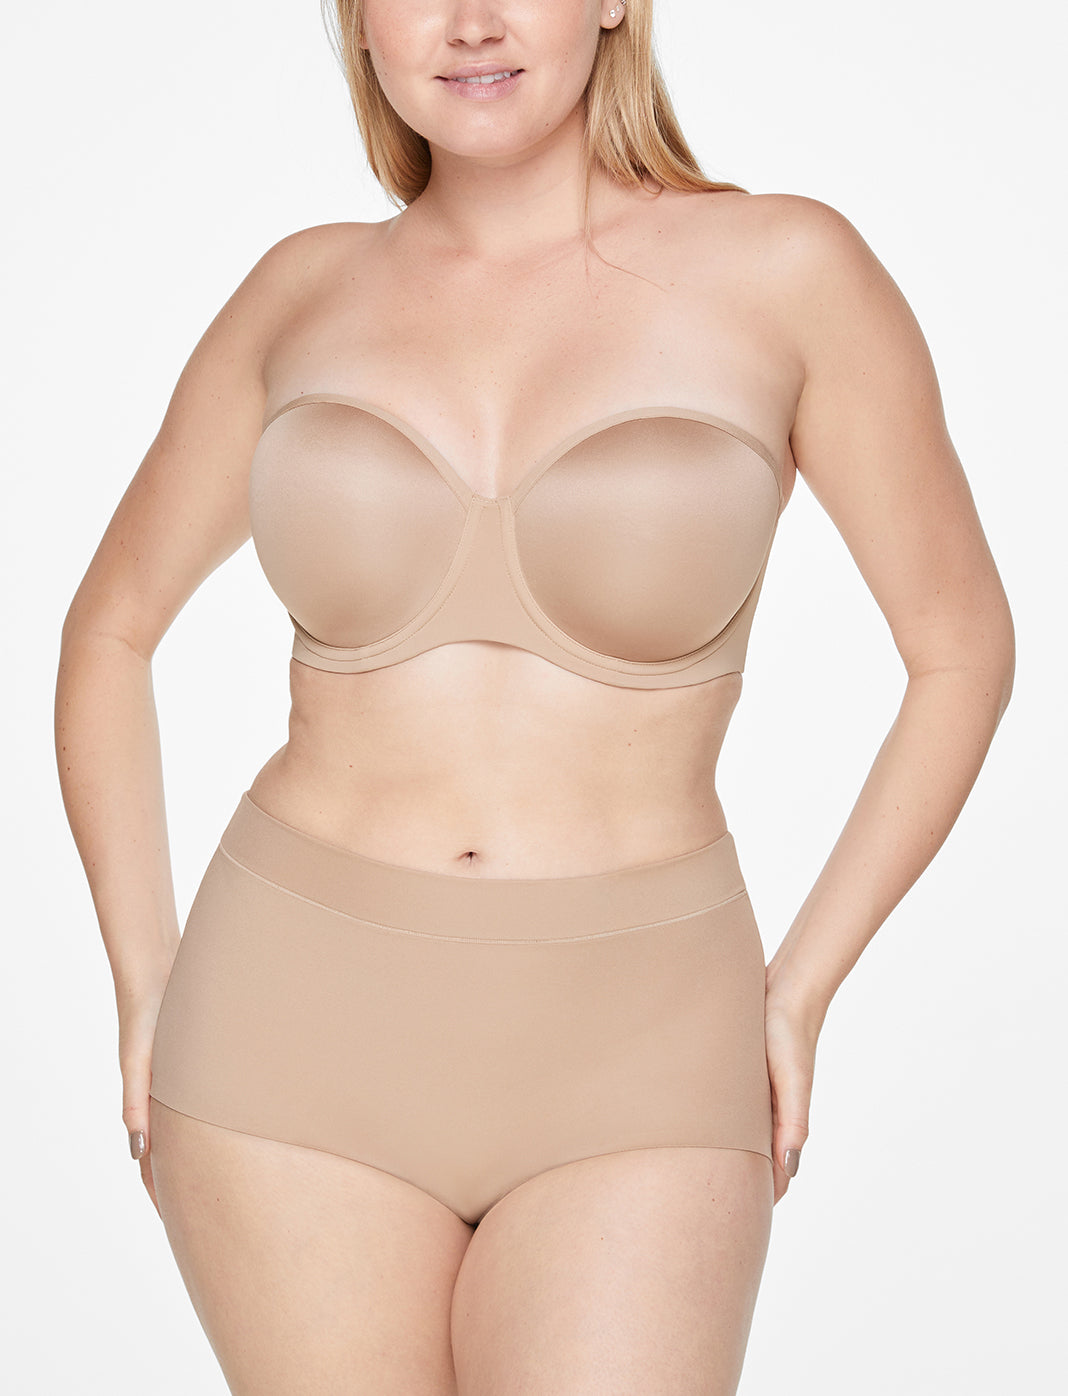 Zivame Strapless Bras  When the sun comes out, so do the